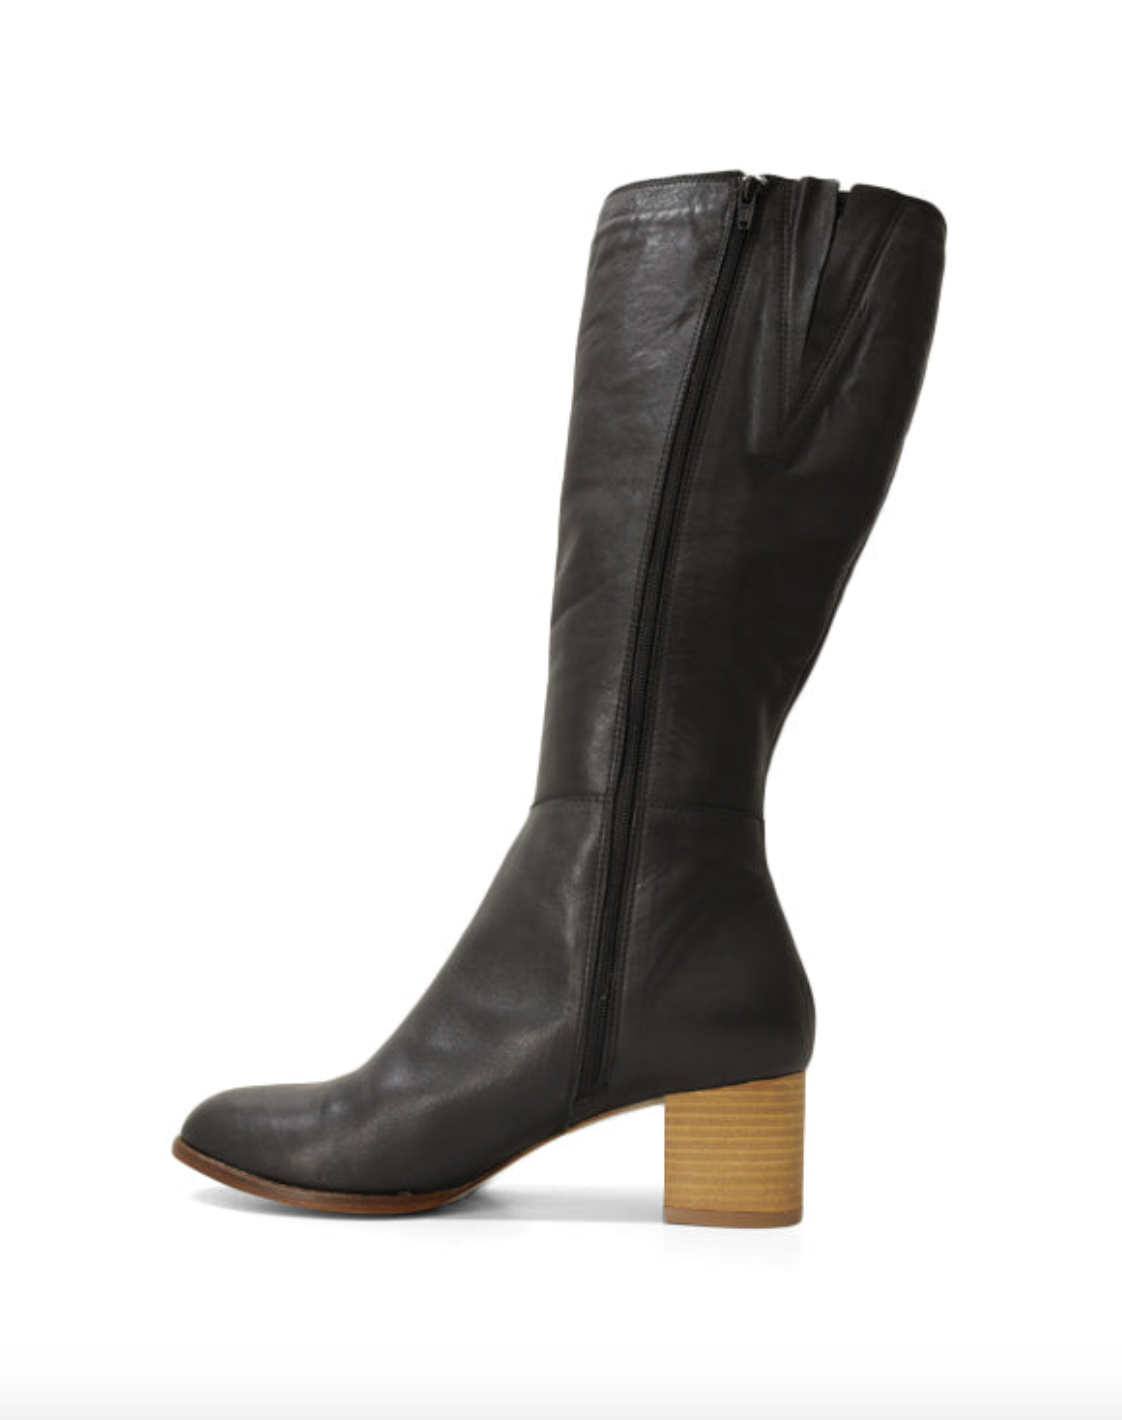 Bueno Emily Long Boots - black knee high boots